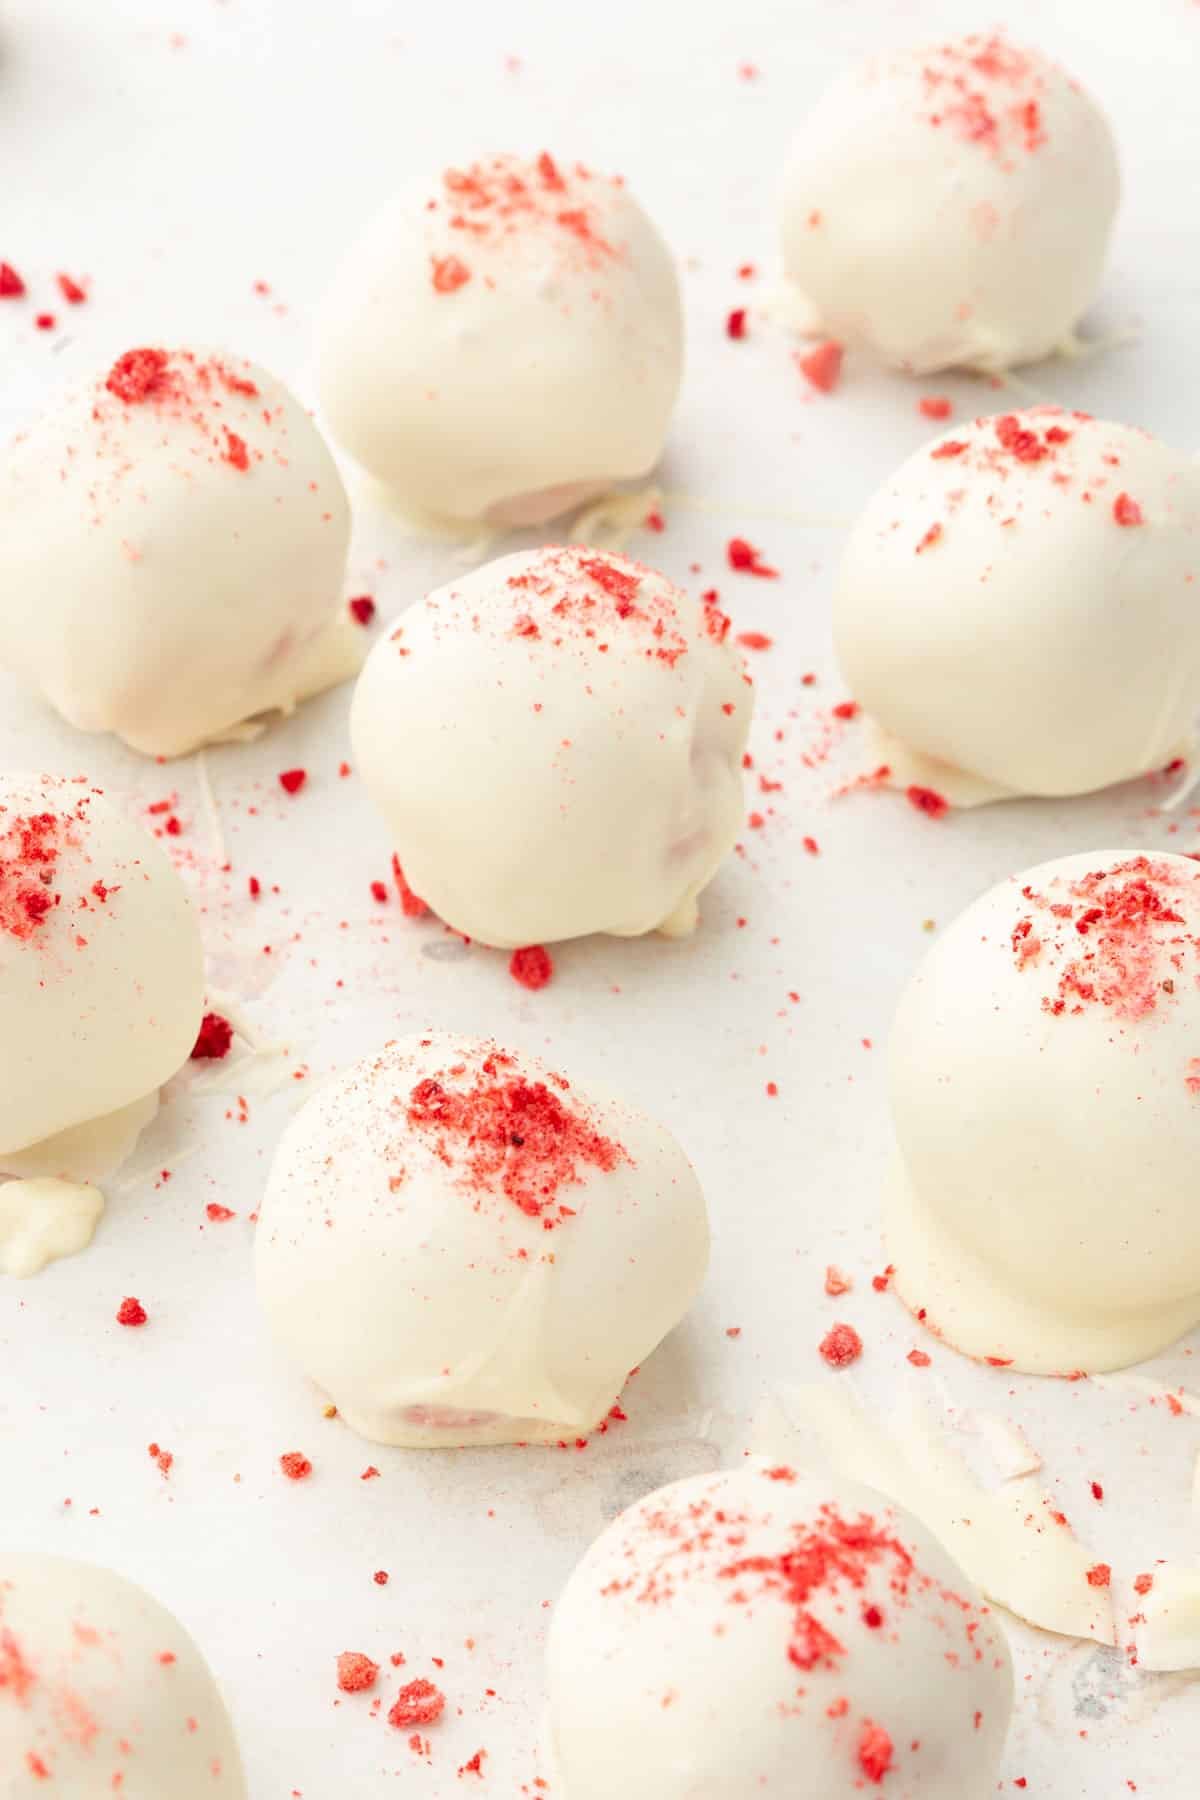 White chocolate truffle balls topped with freeze-dried strawberry powder on parchment paper.